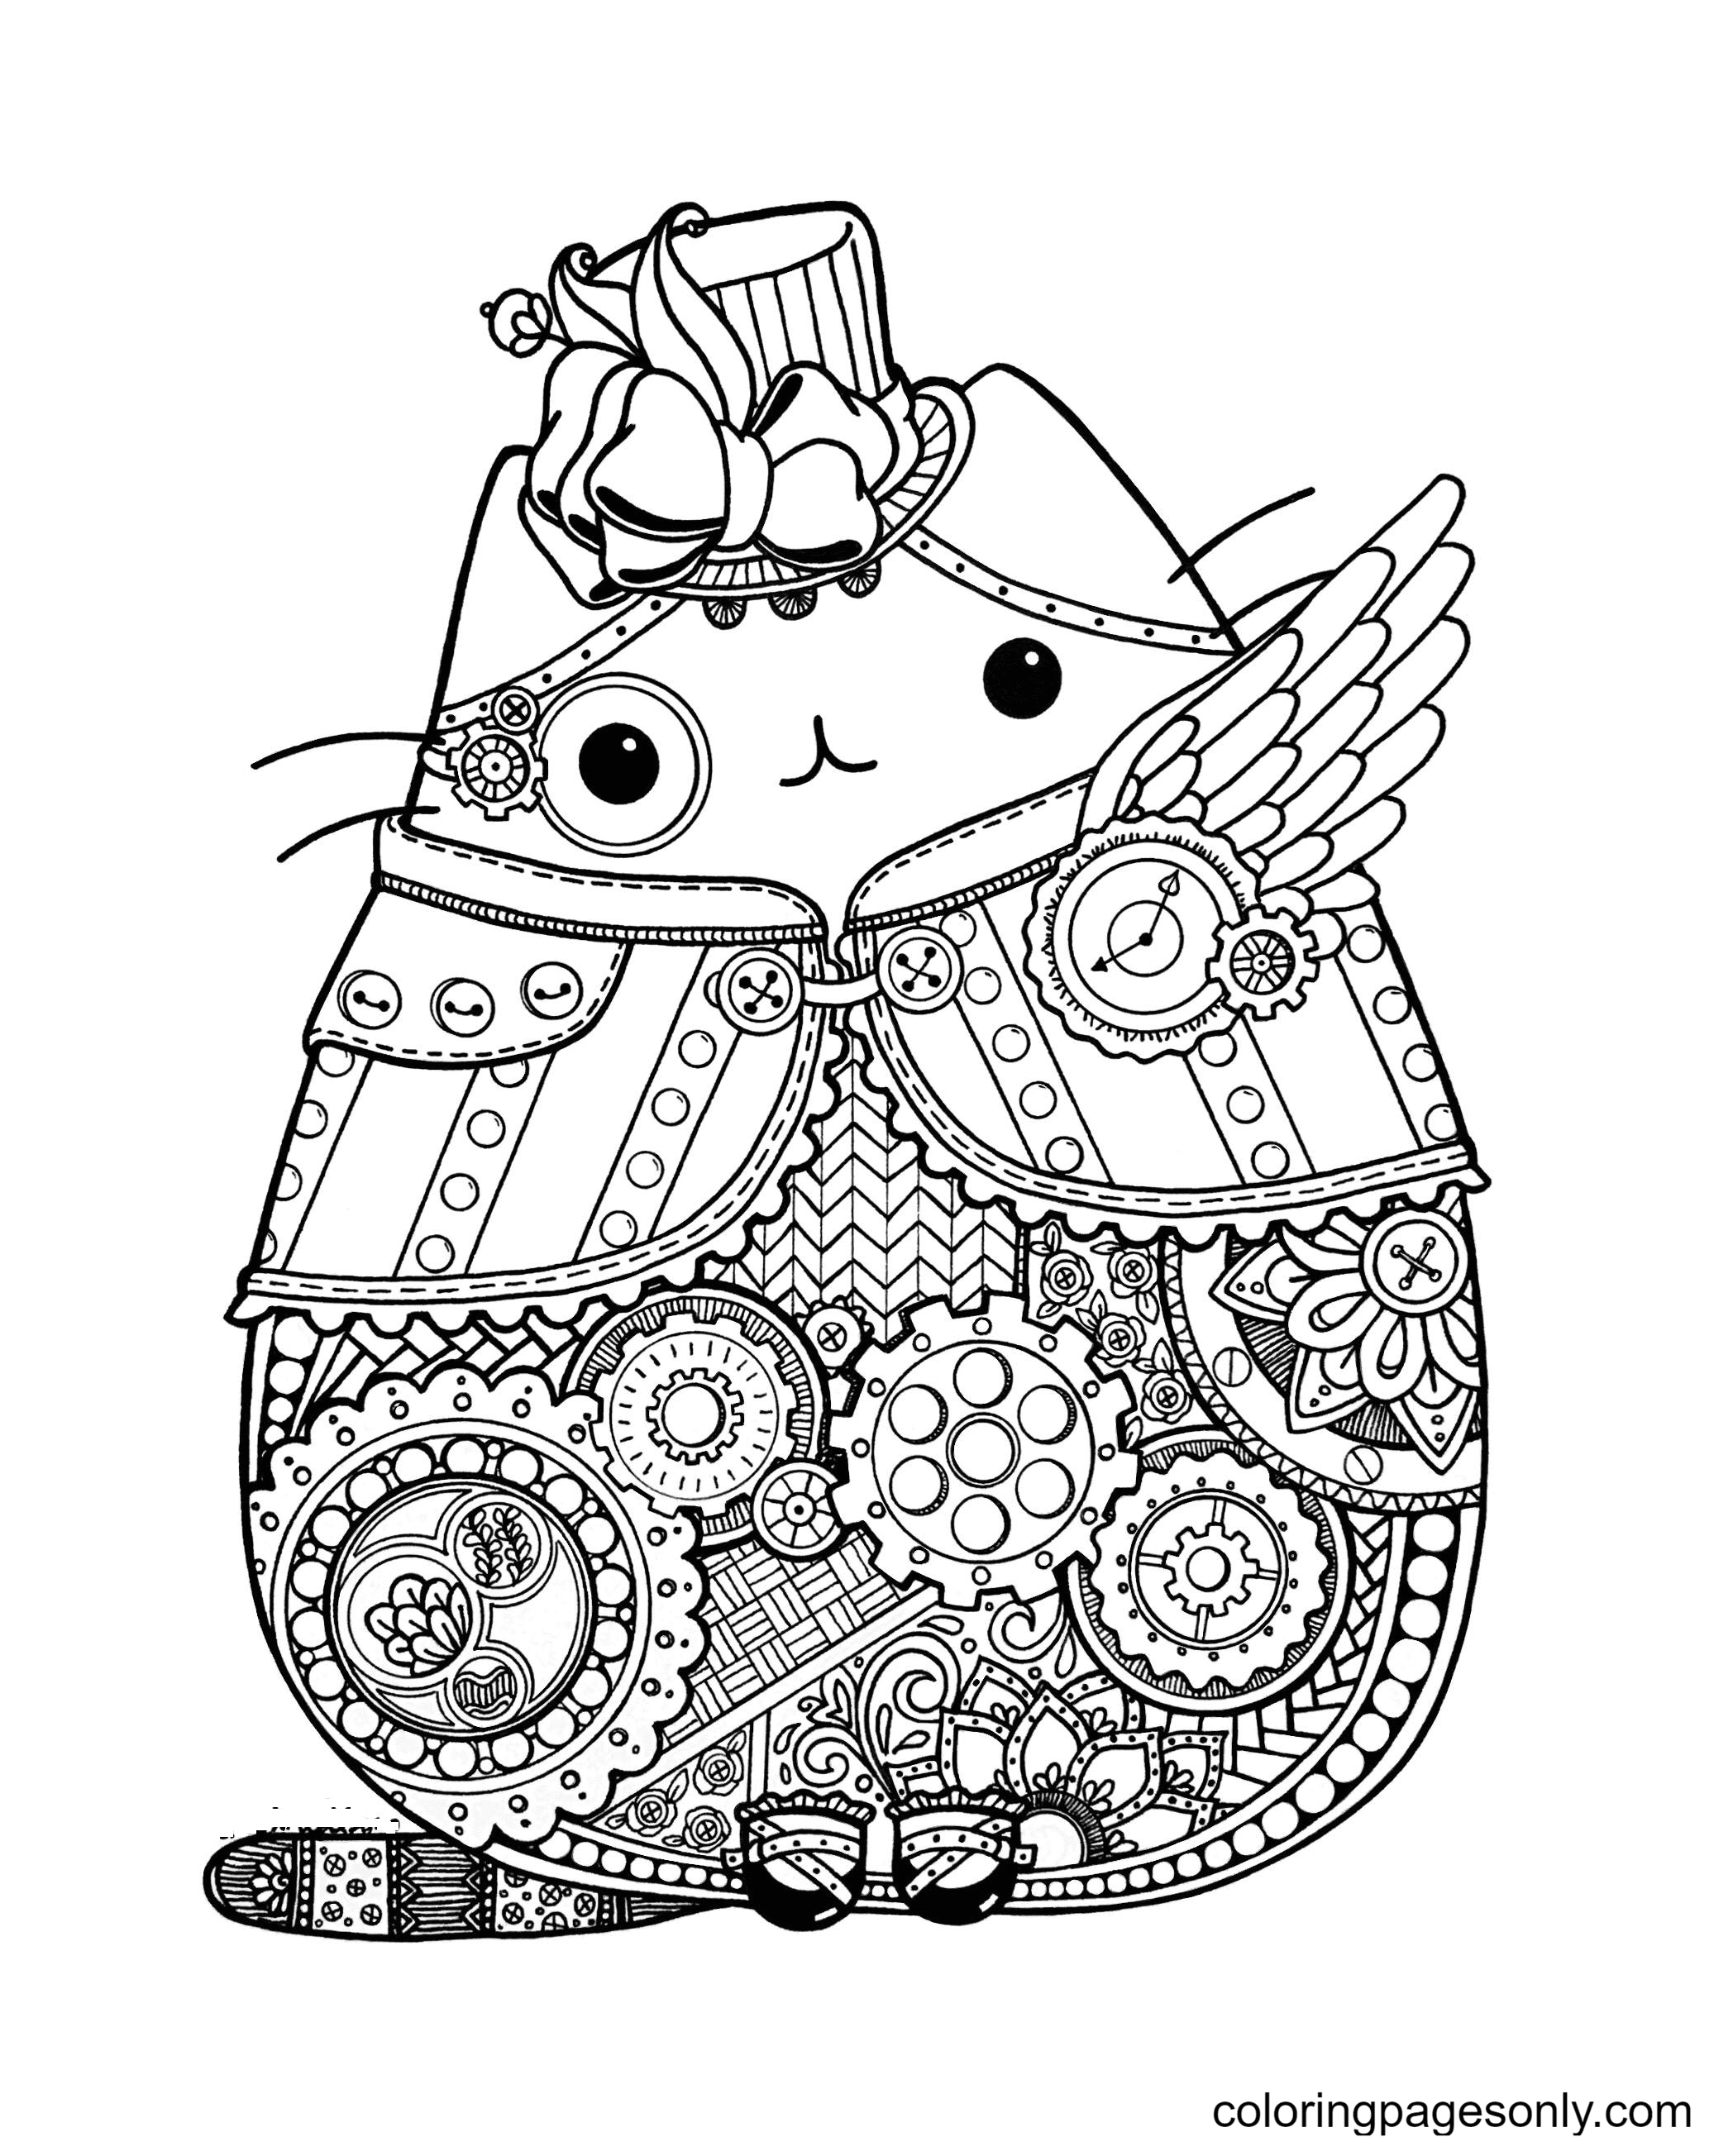 Steampunk Pusheen Coloring Pages